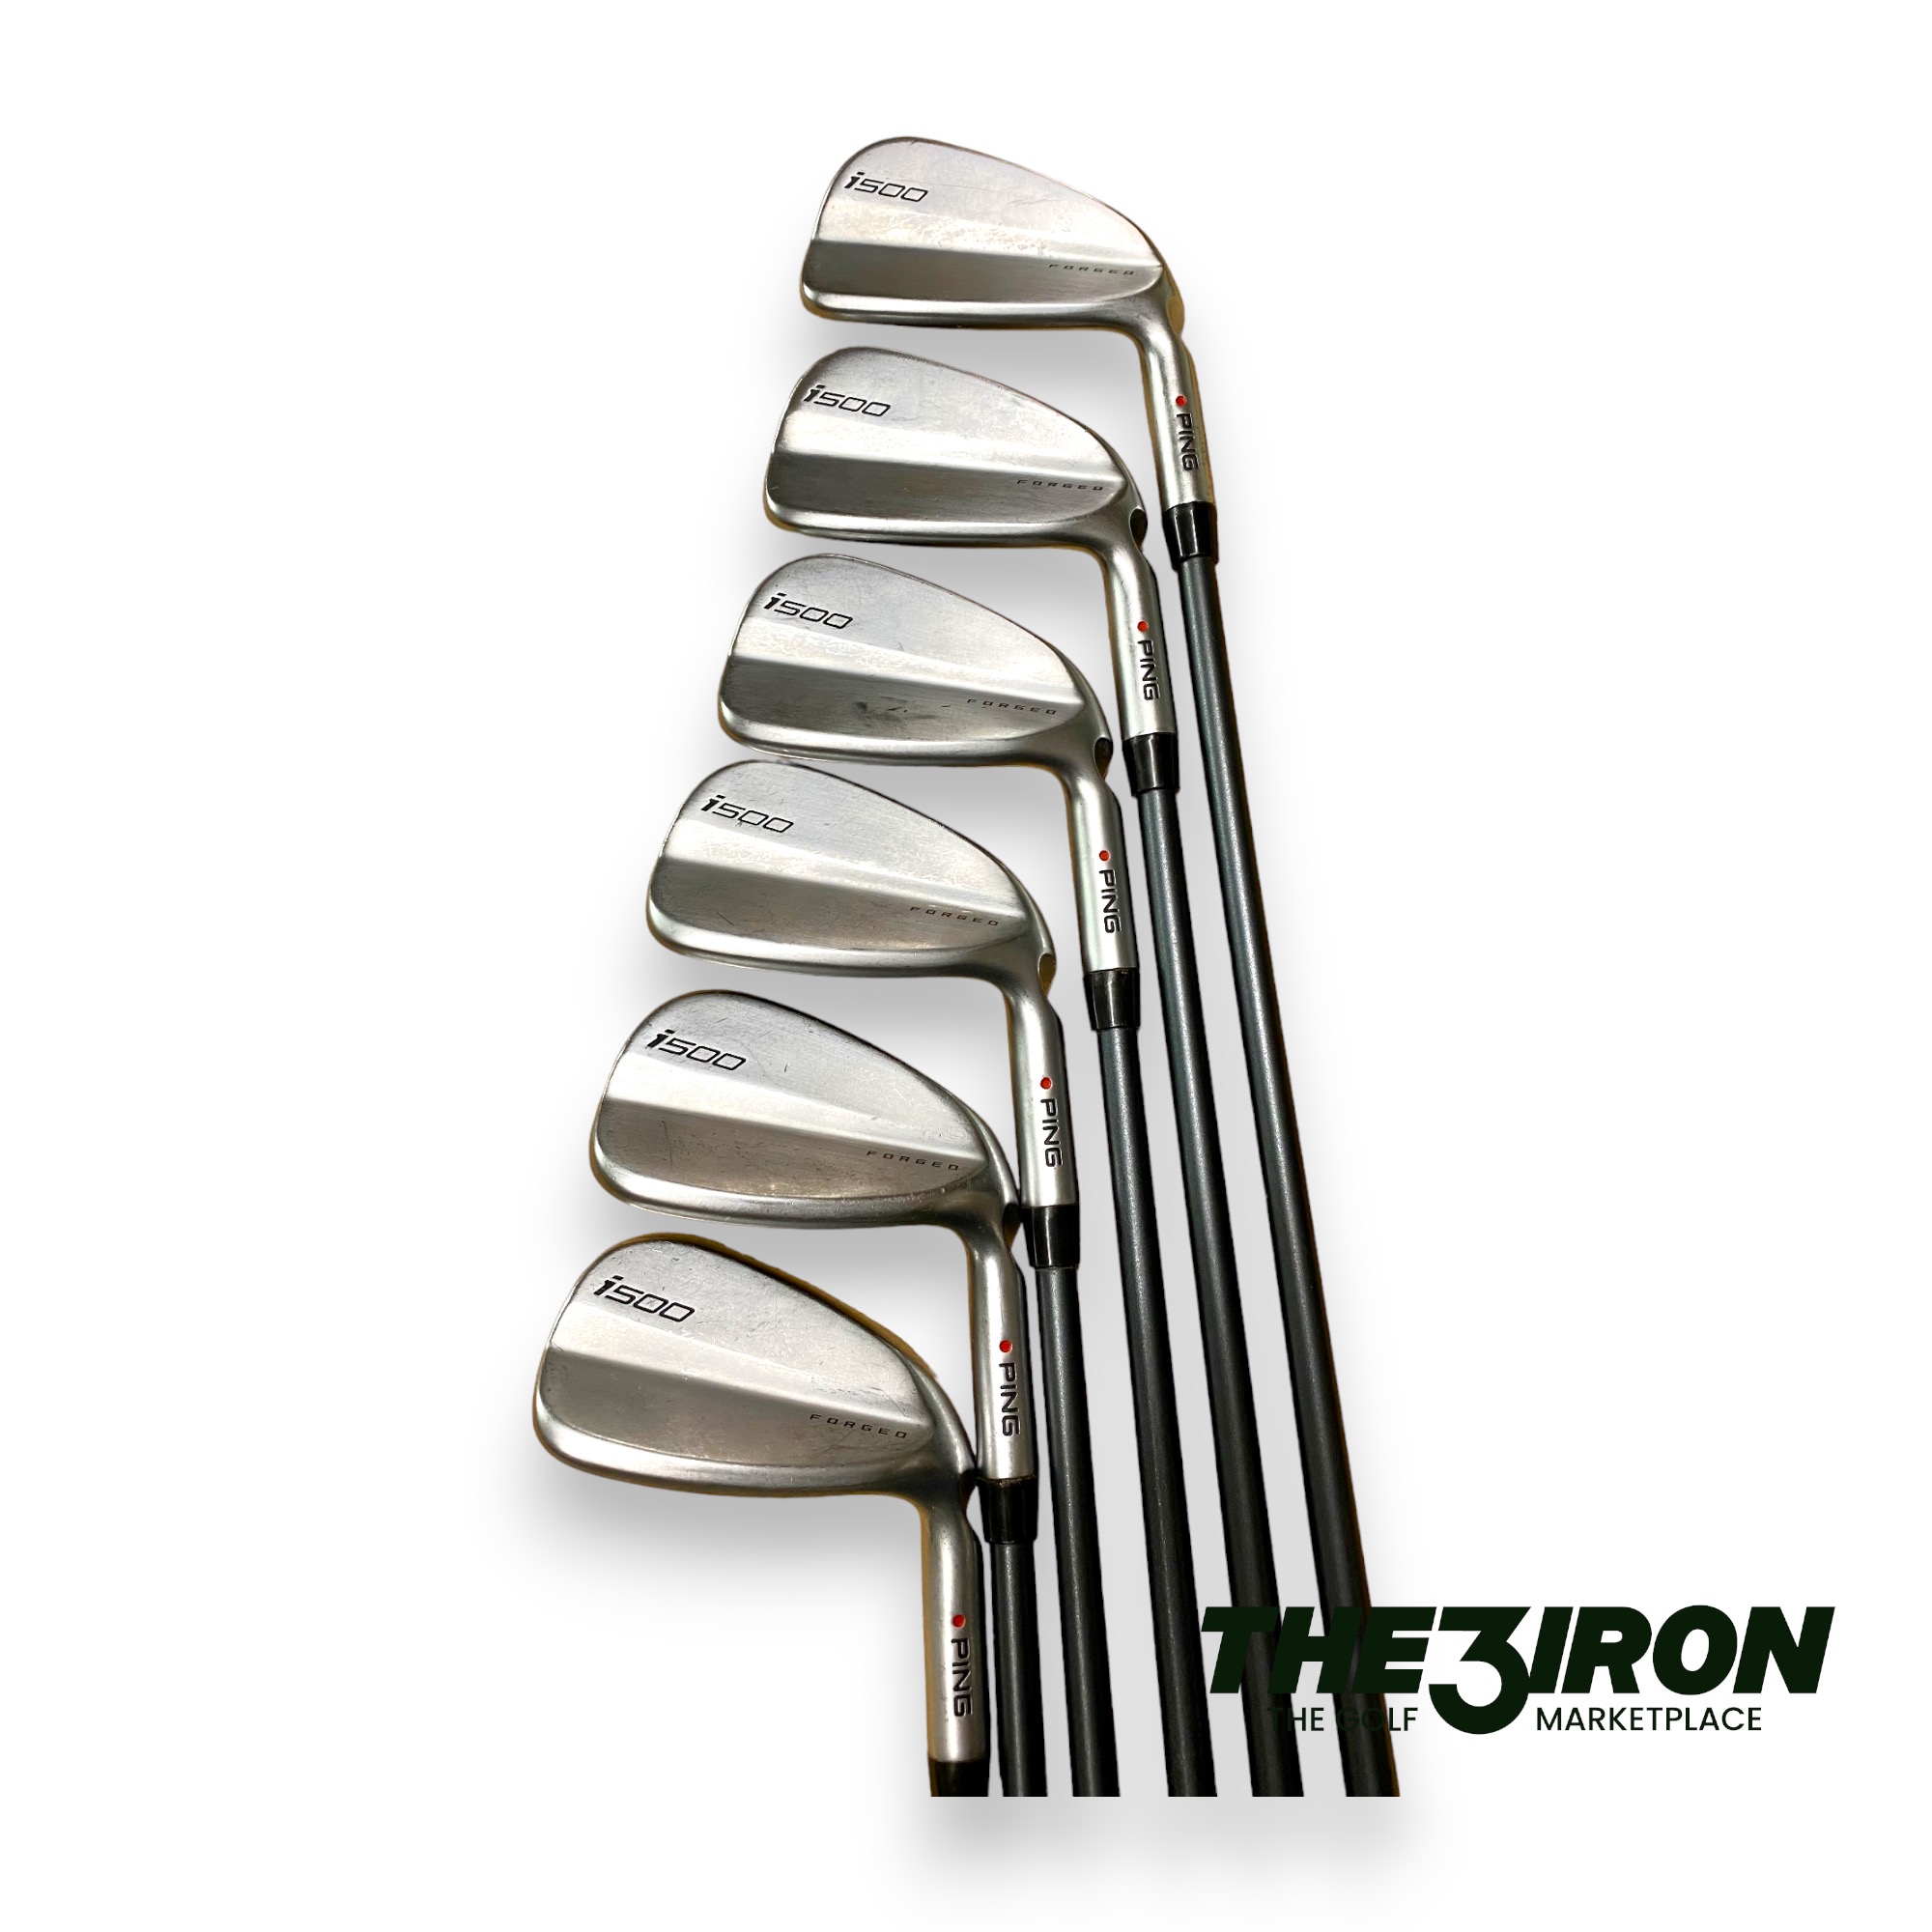 Ping Archives - The3Iron